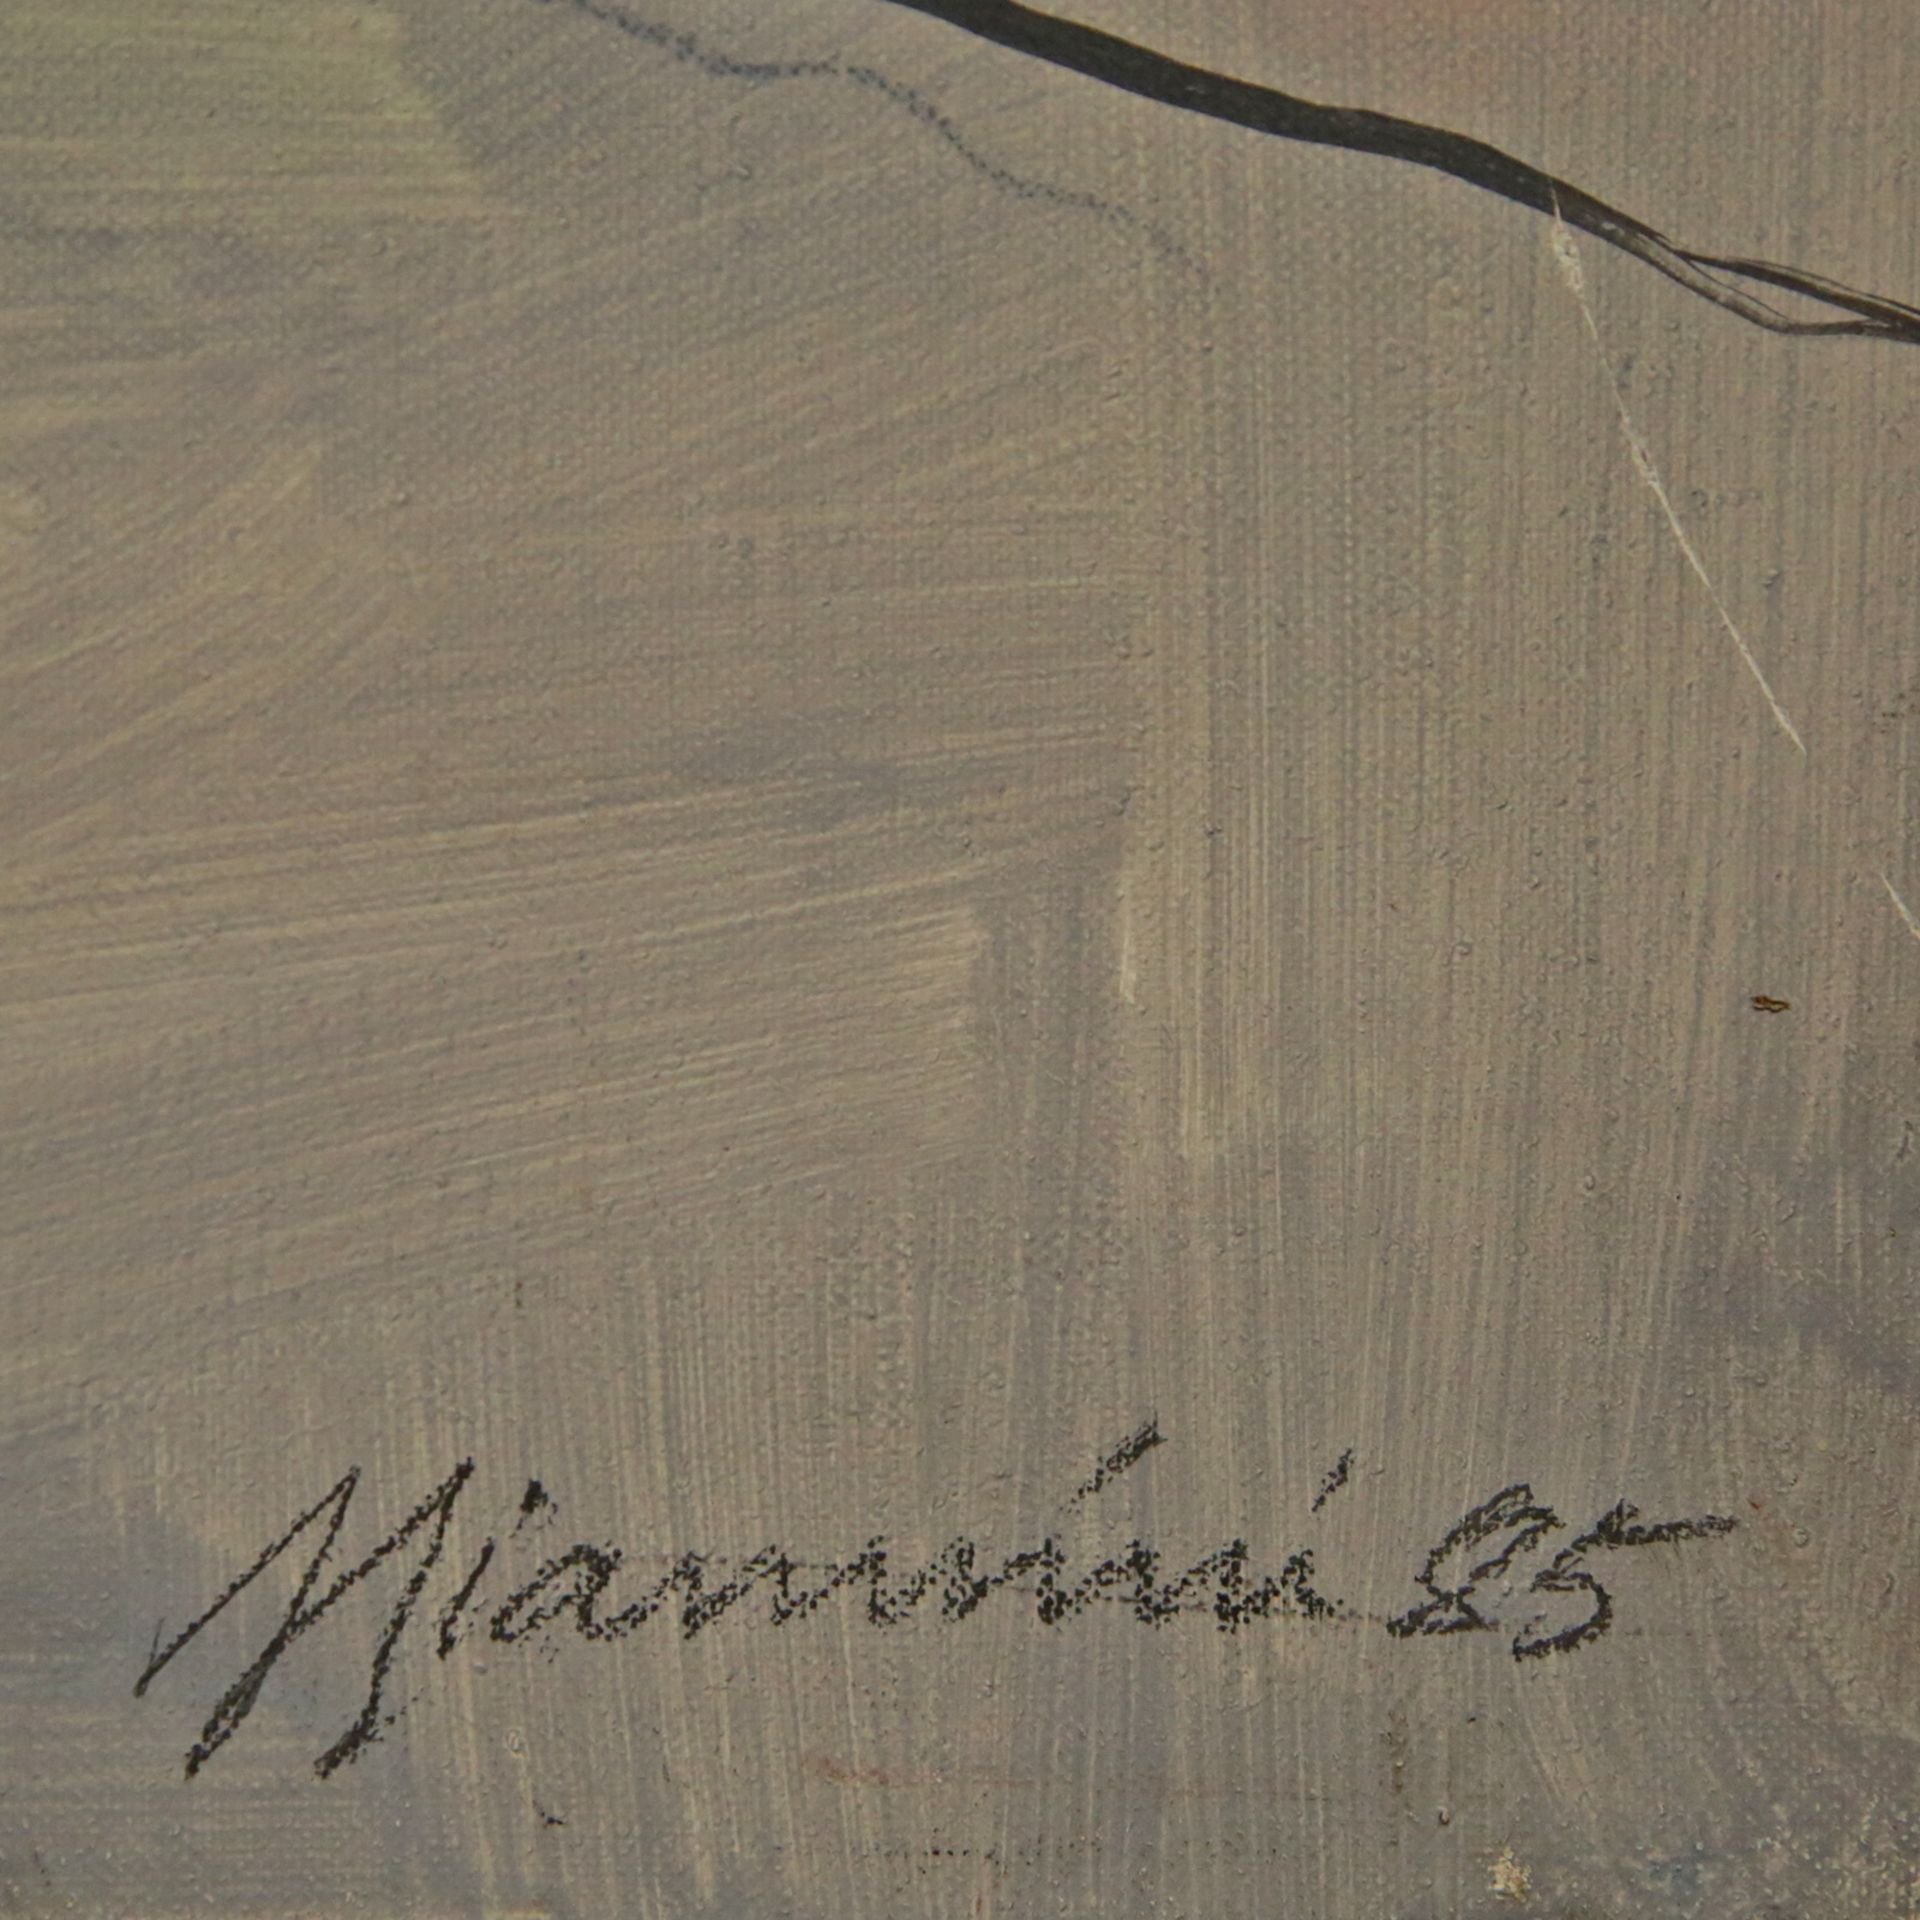 Female nude 1985, oil on canvas, signed by the artist in the lower right corner of Miannini. - Image 5 of 5